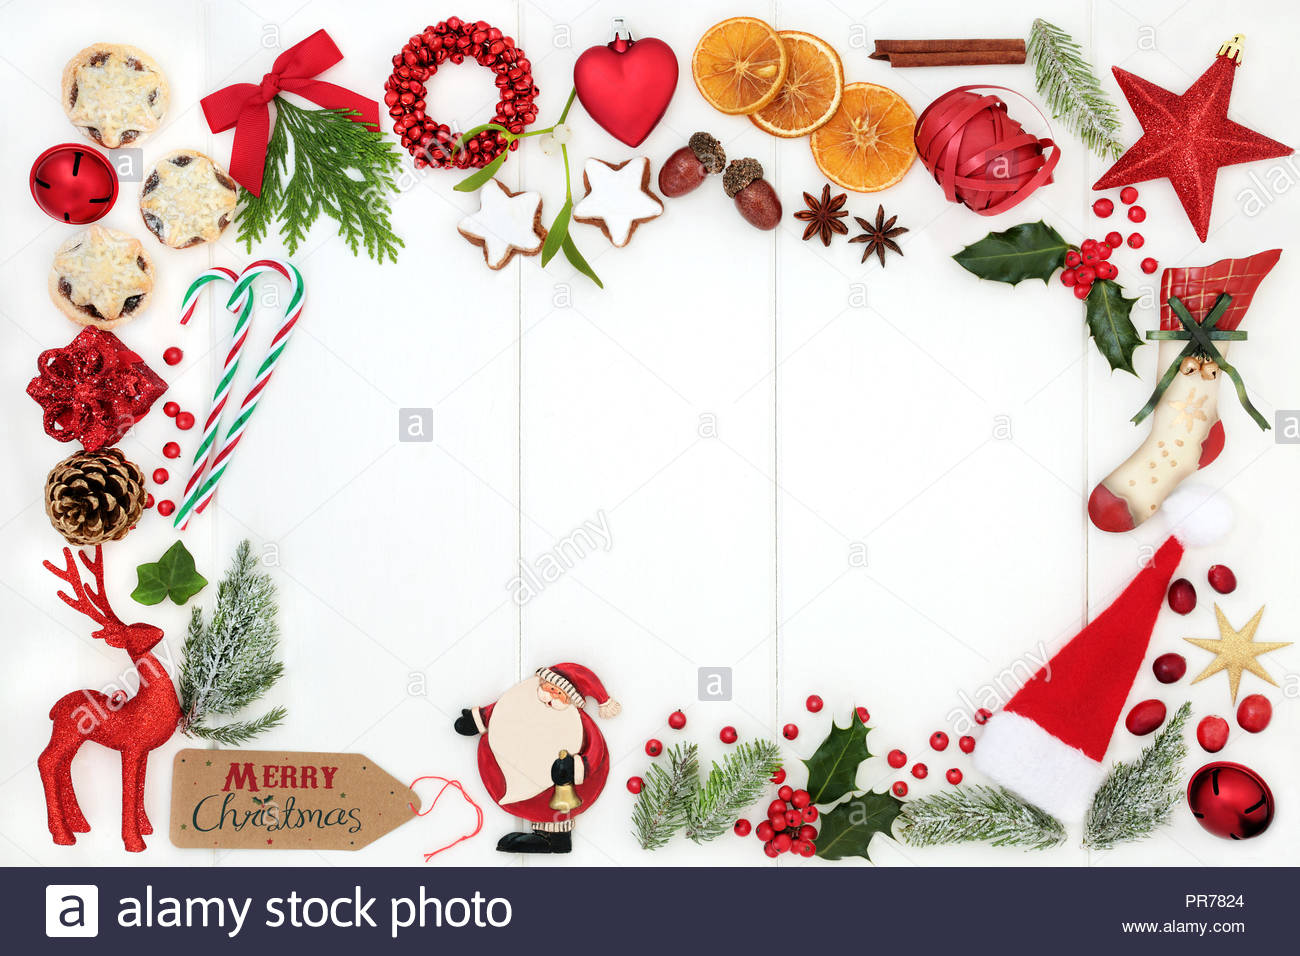 Christmas background border composition with traditional symbols